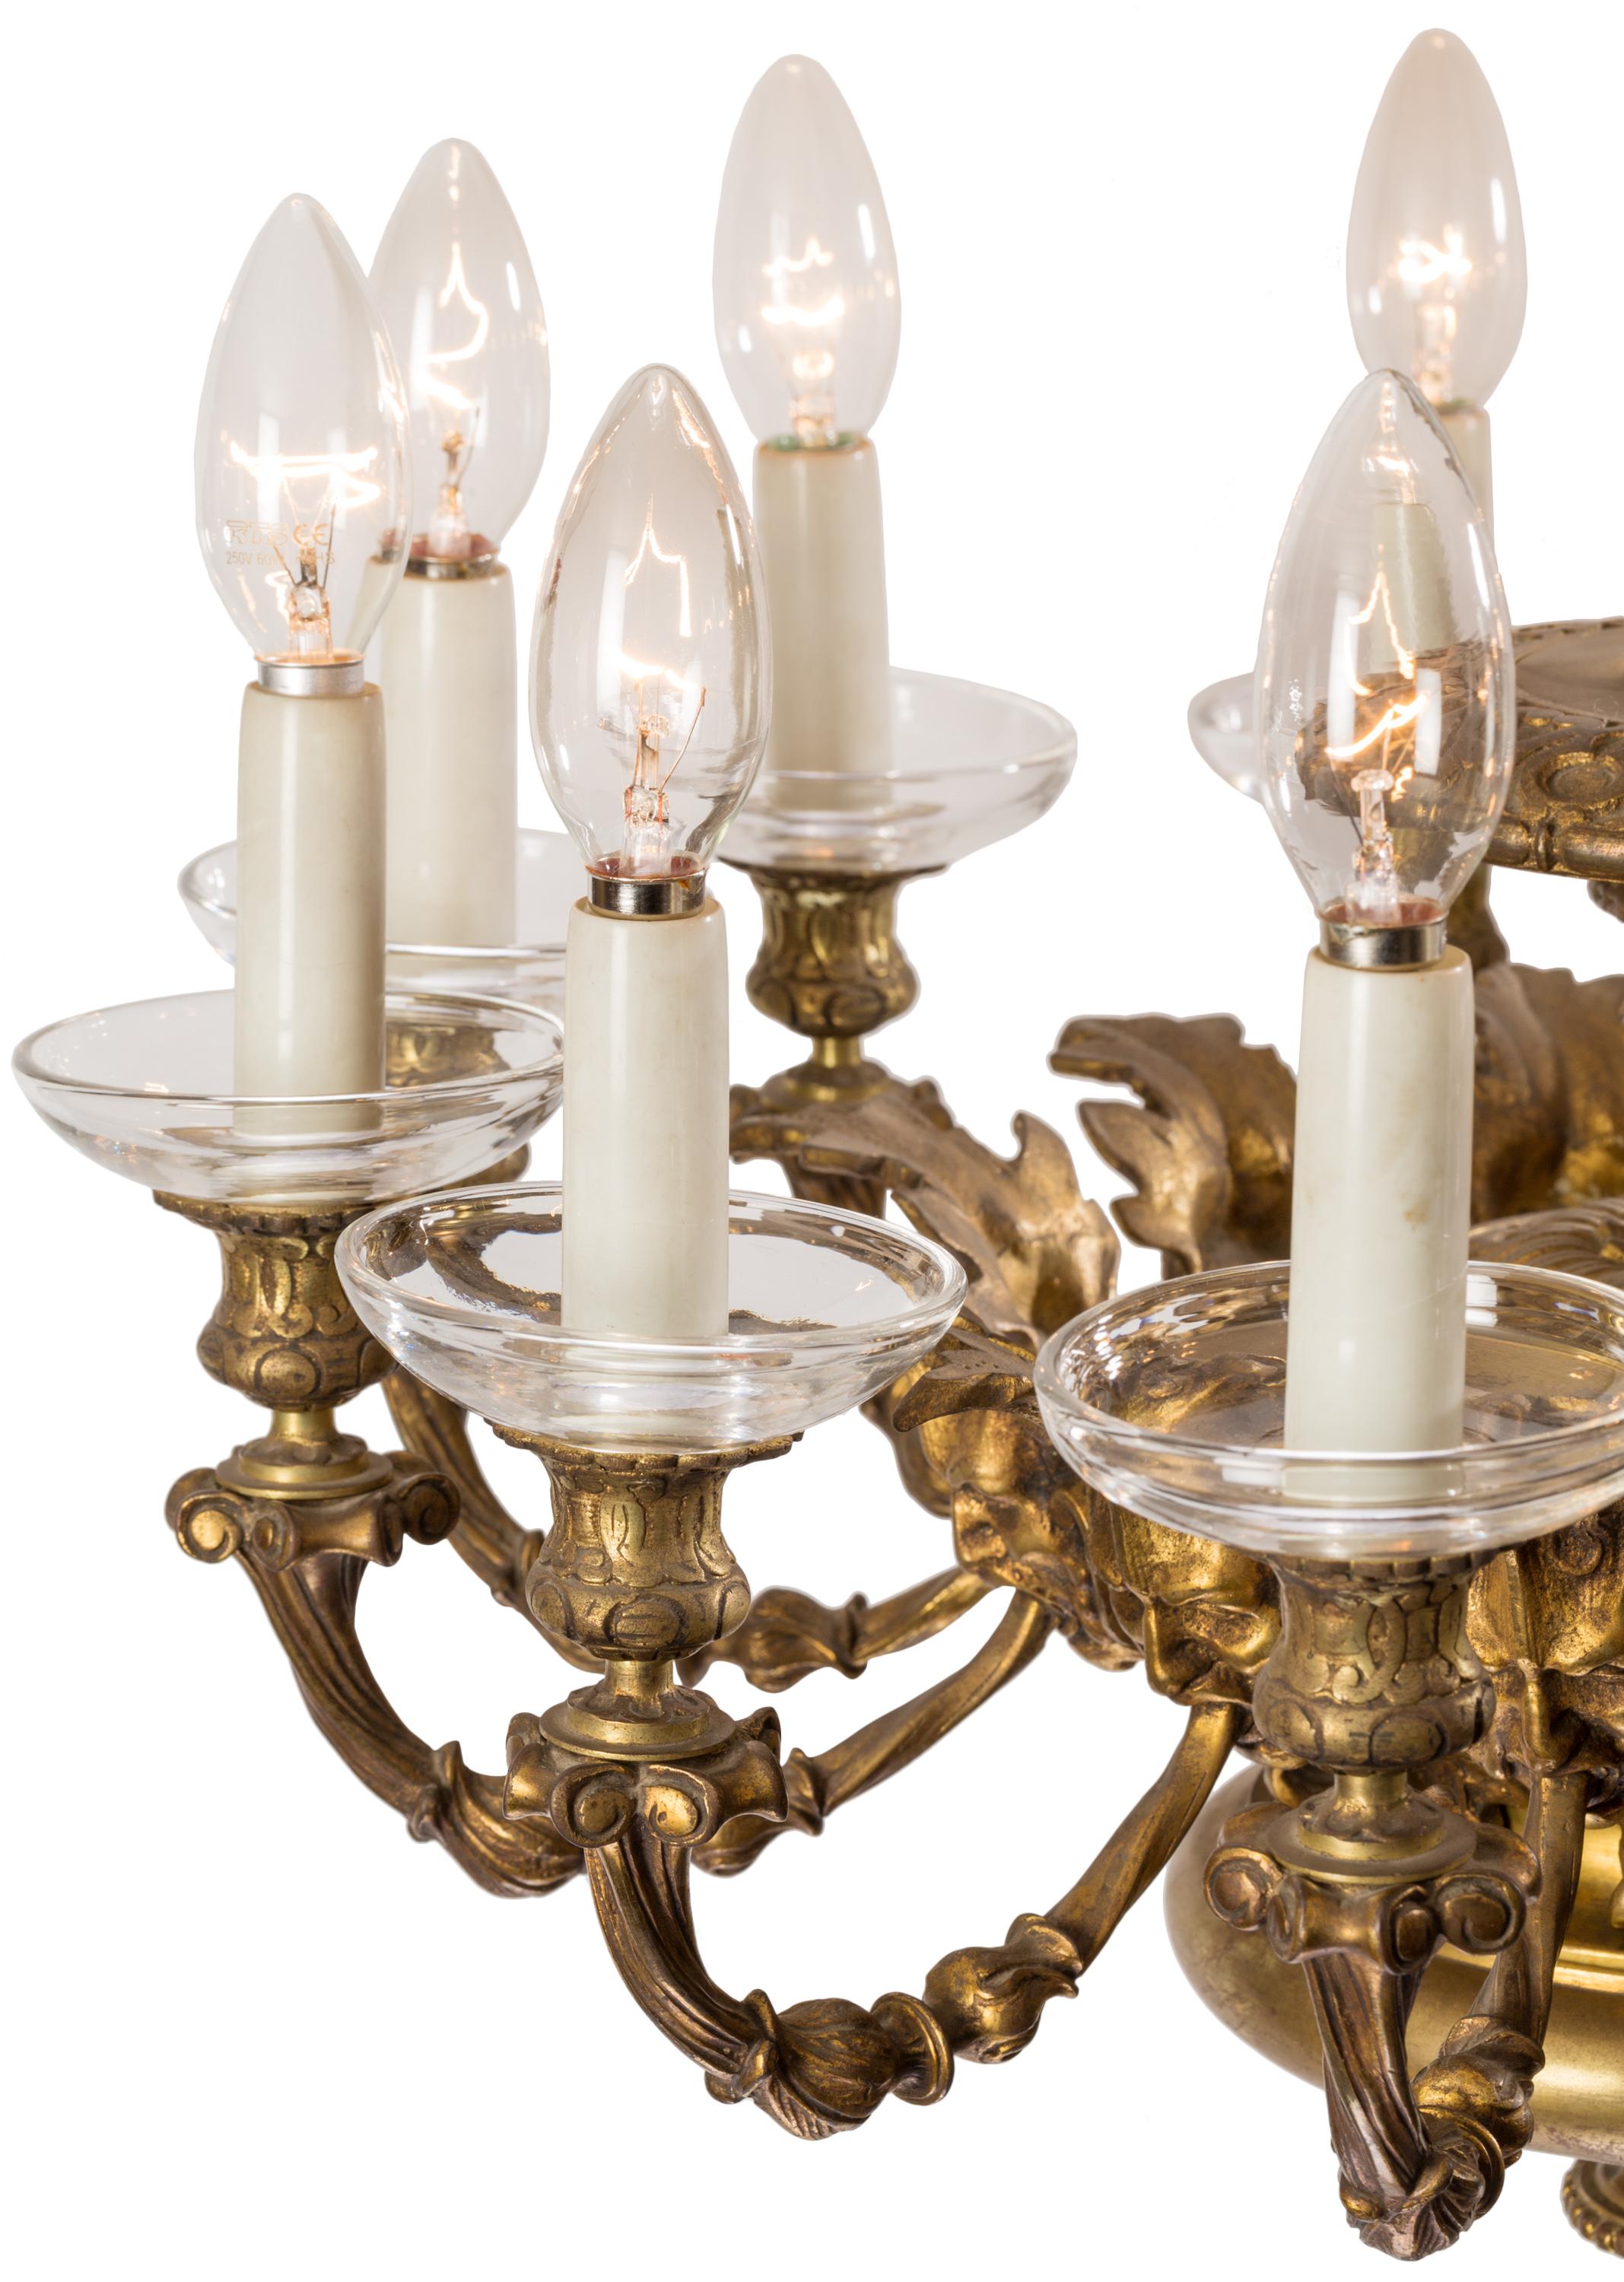 This French gilt brass 12-light chandelier seems to take its overall structure from the gas chandeliers (gasoliers) of the 1850s and 1860s, but having no gas cocks or external wiring, this lamp was made for electricity, probably in the late 19th or